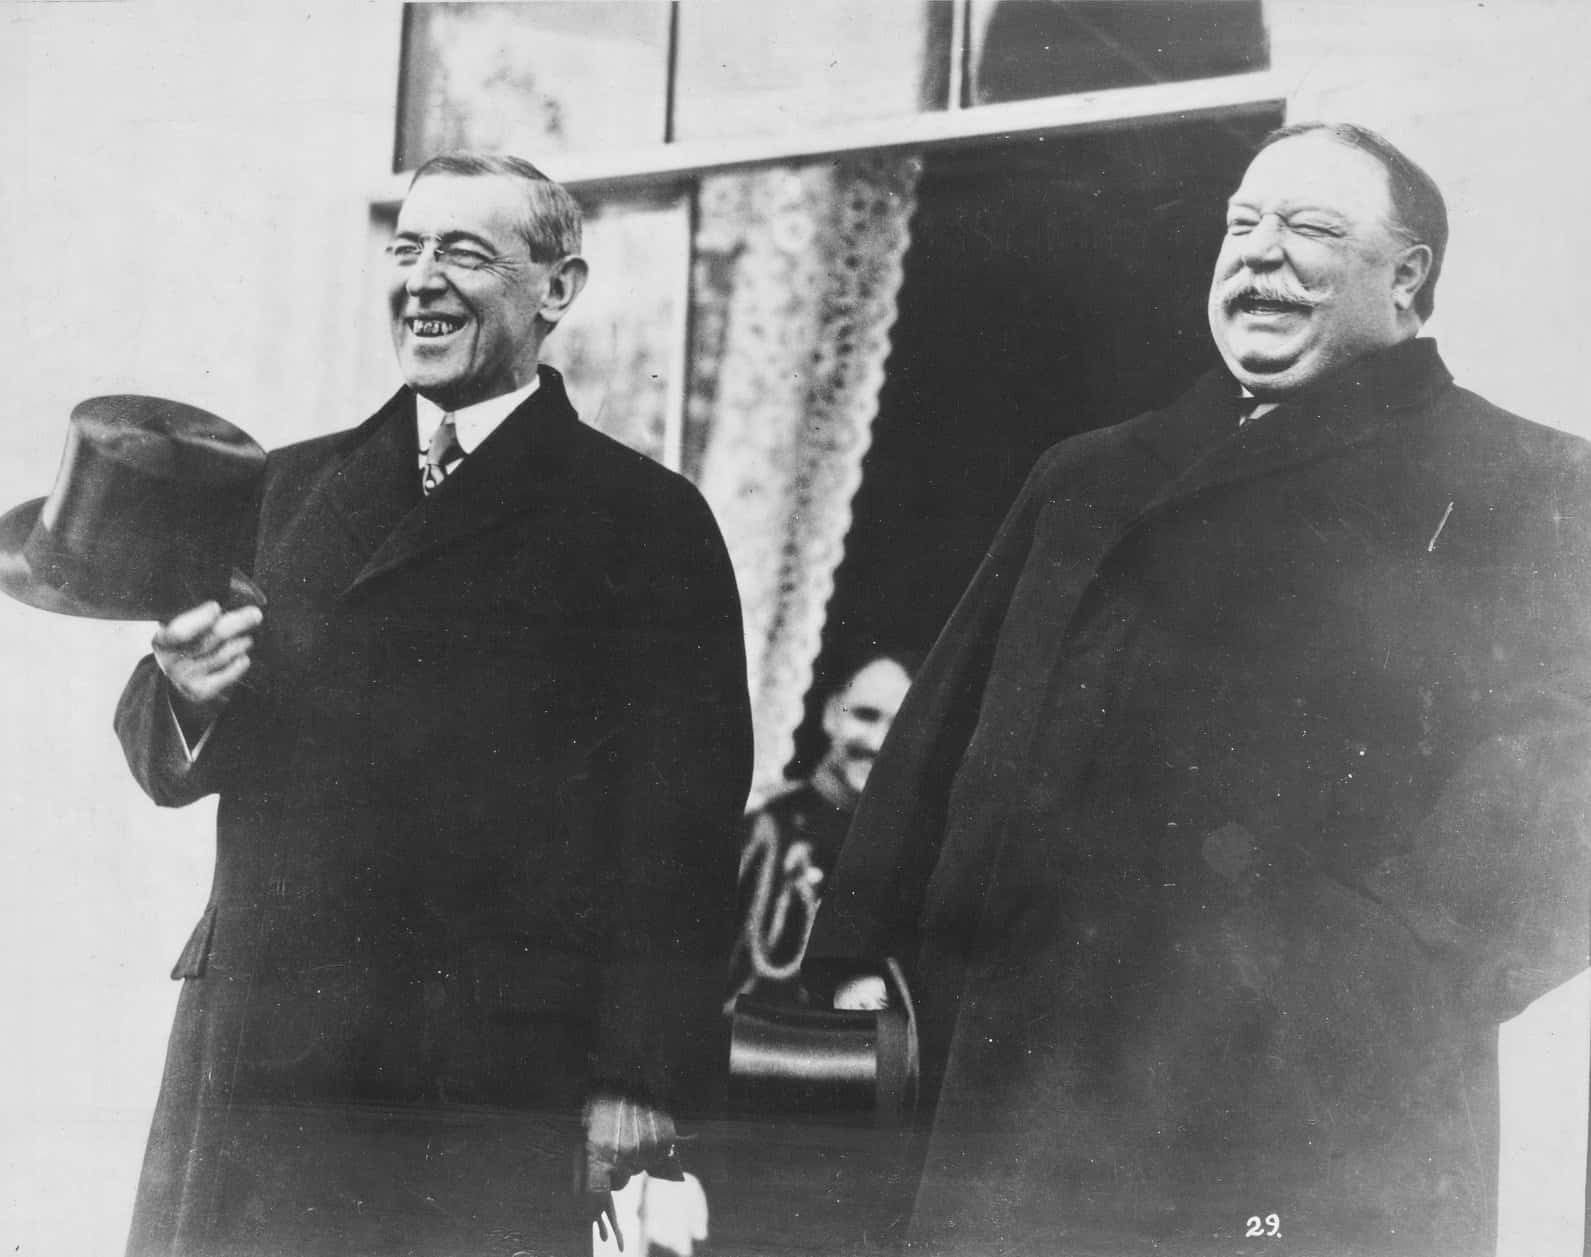 President-elect-Wilson-and-President-Taft-standing-side-by-side-laughing-at-White-House-prior-to-Wilsons-inauguration-ceremonies-March-4-1913.jpg